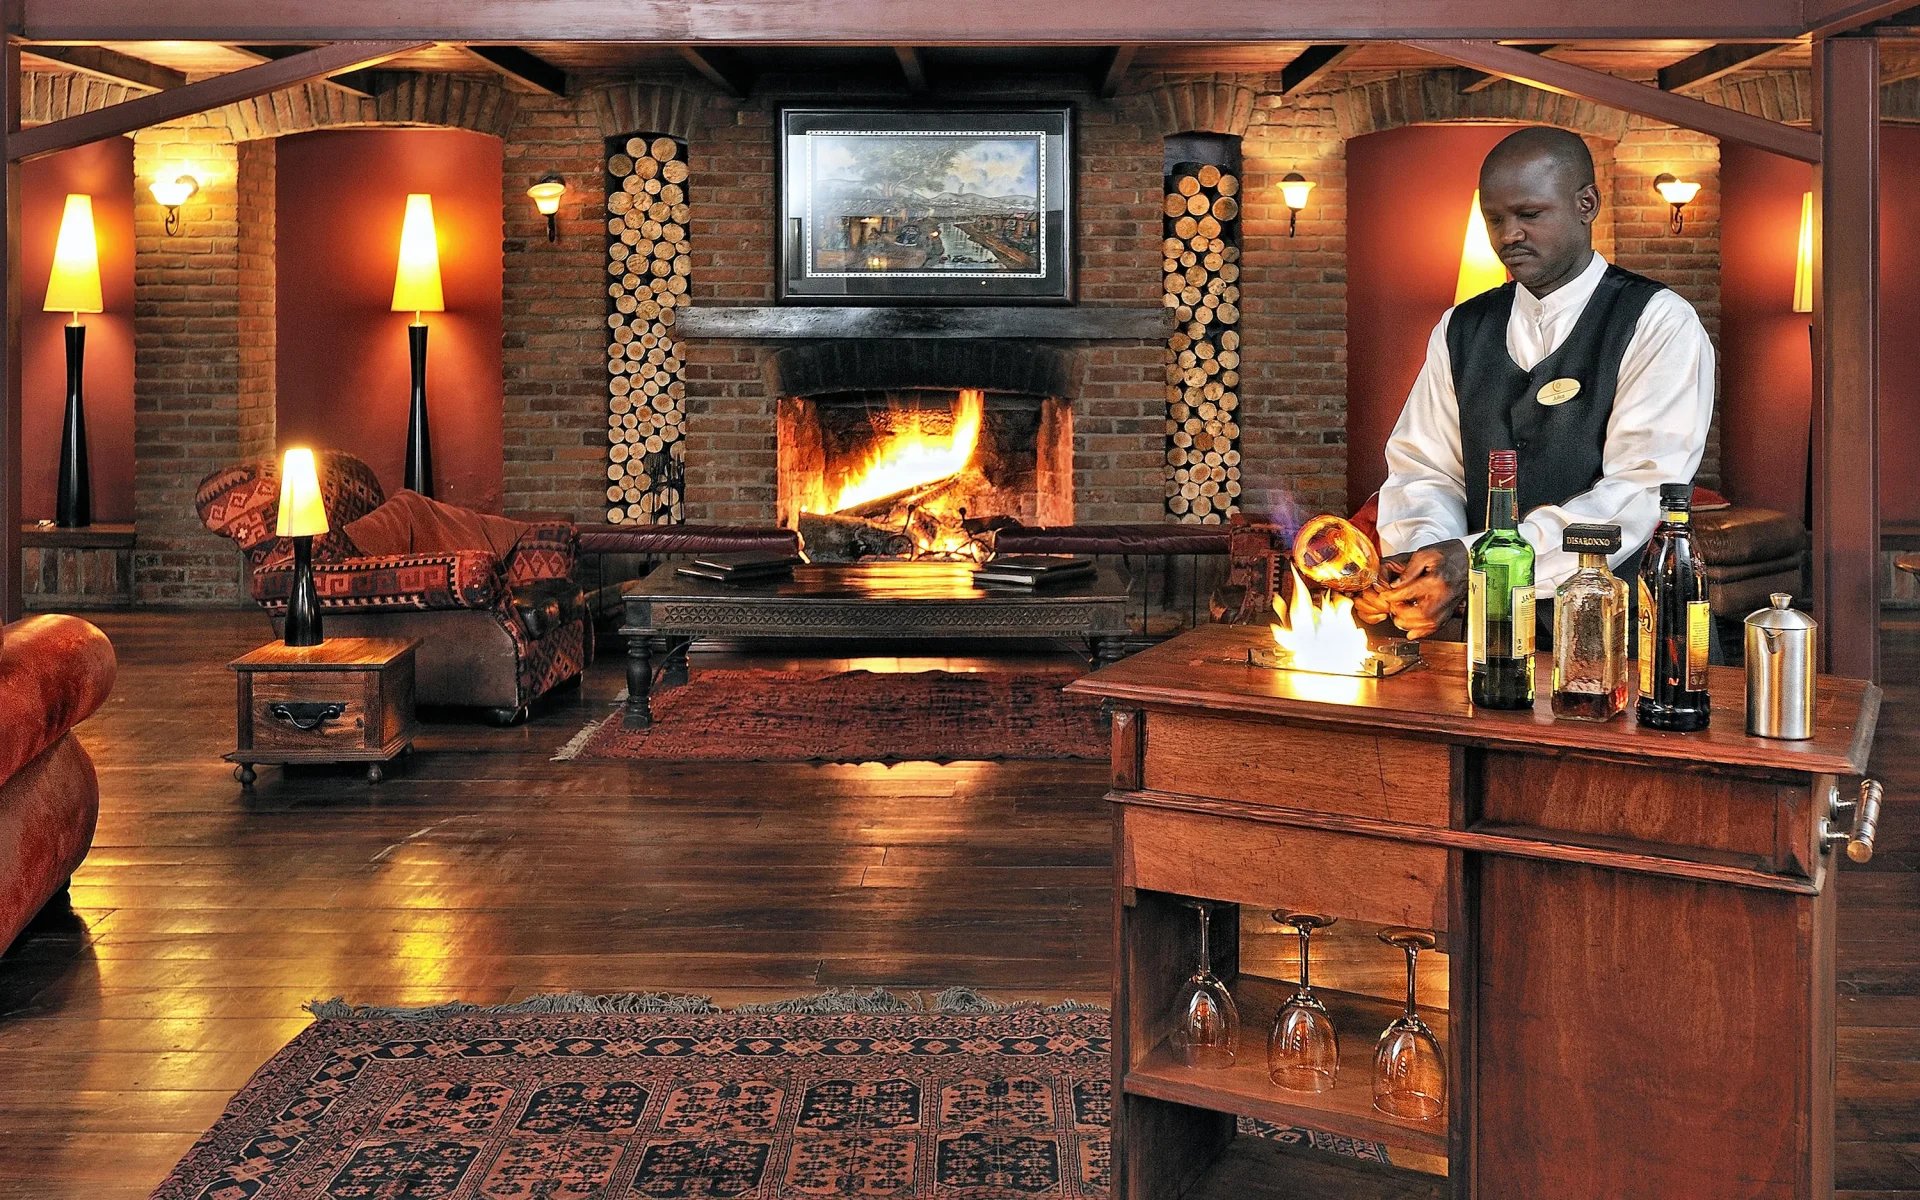 A waiter carefully prepares cocktails in a wood-panelled room which is centered by a logfire and a tapestry rug.